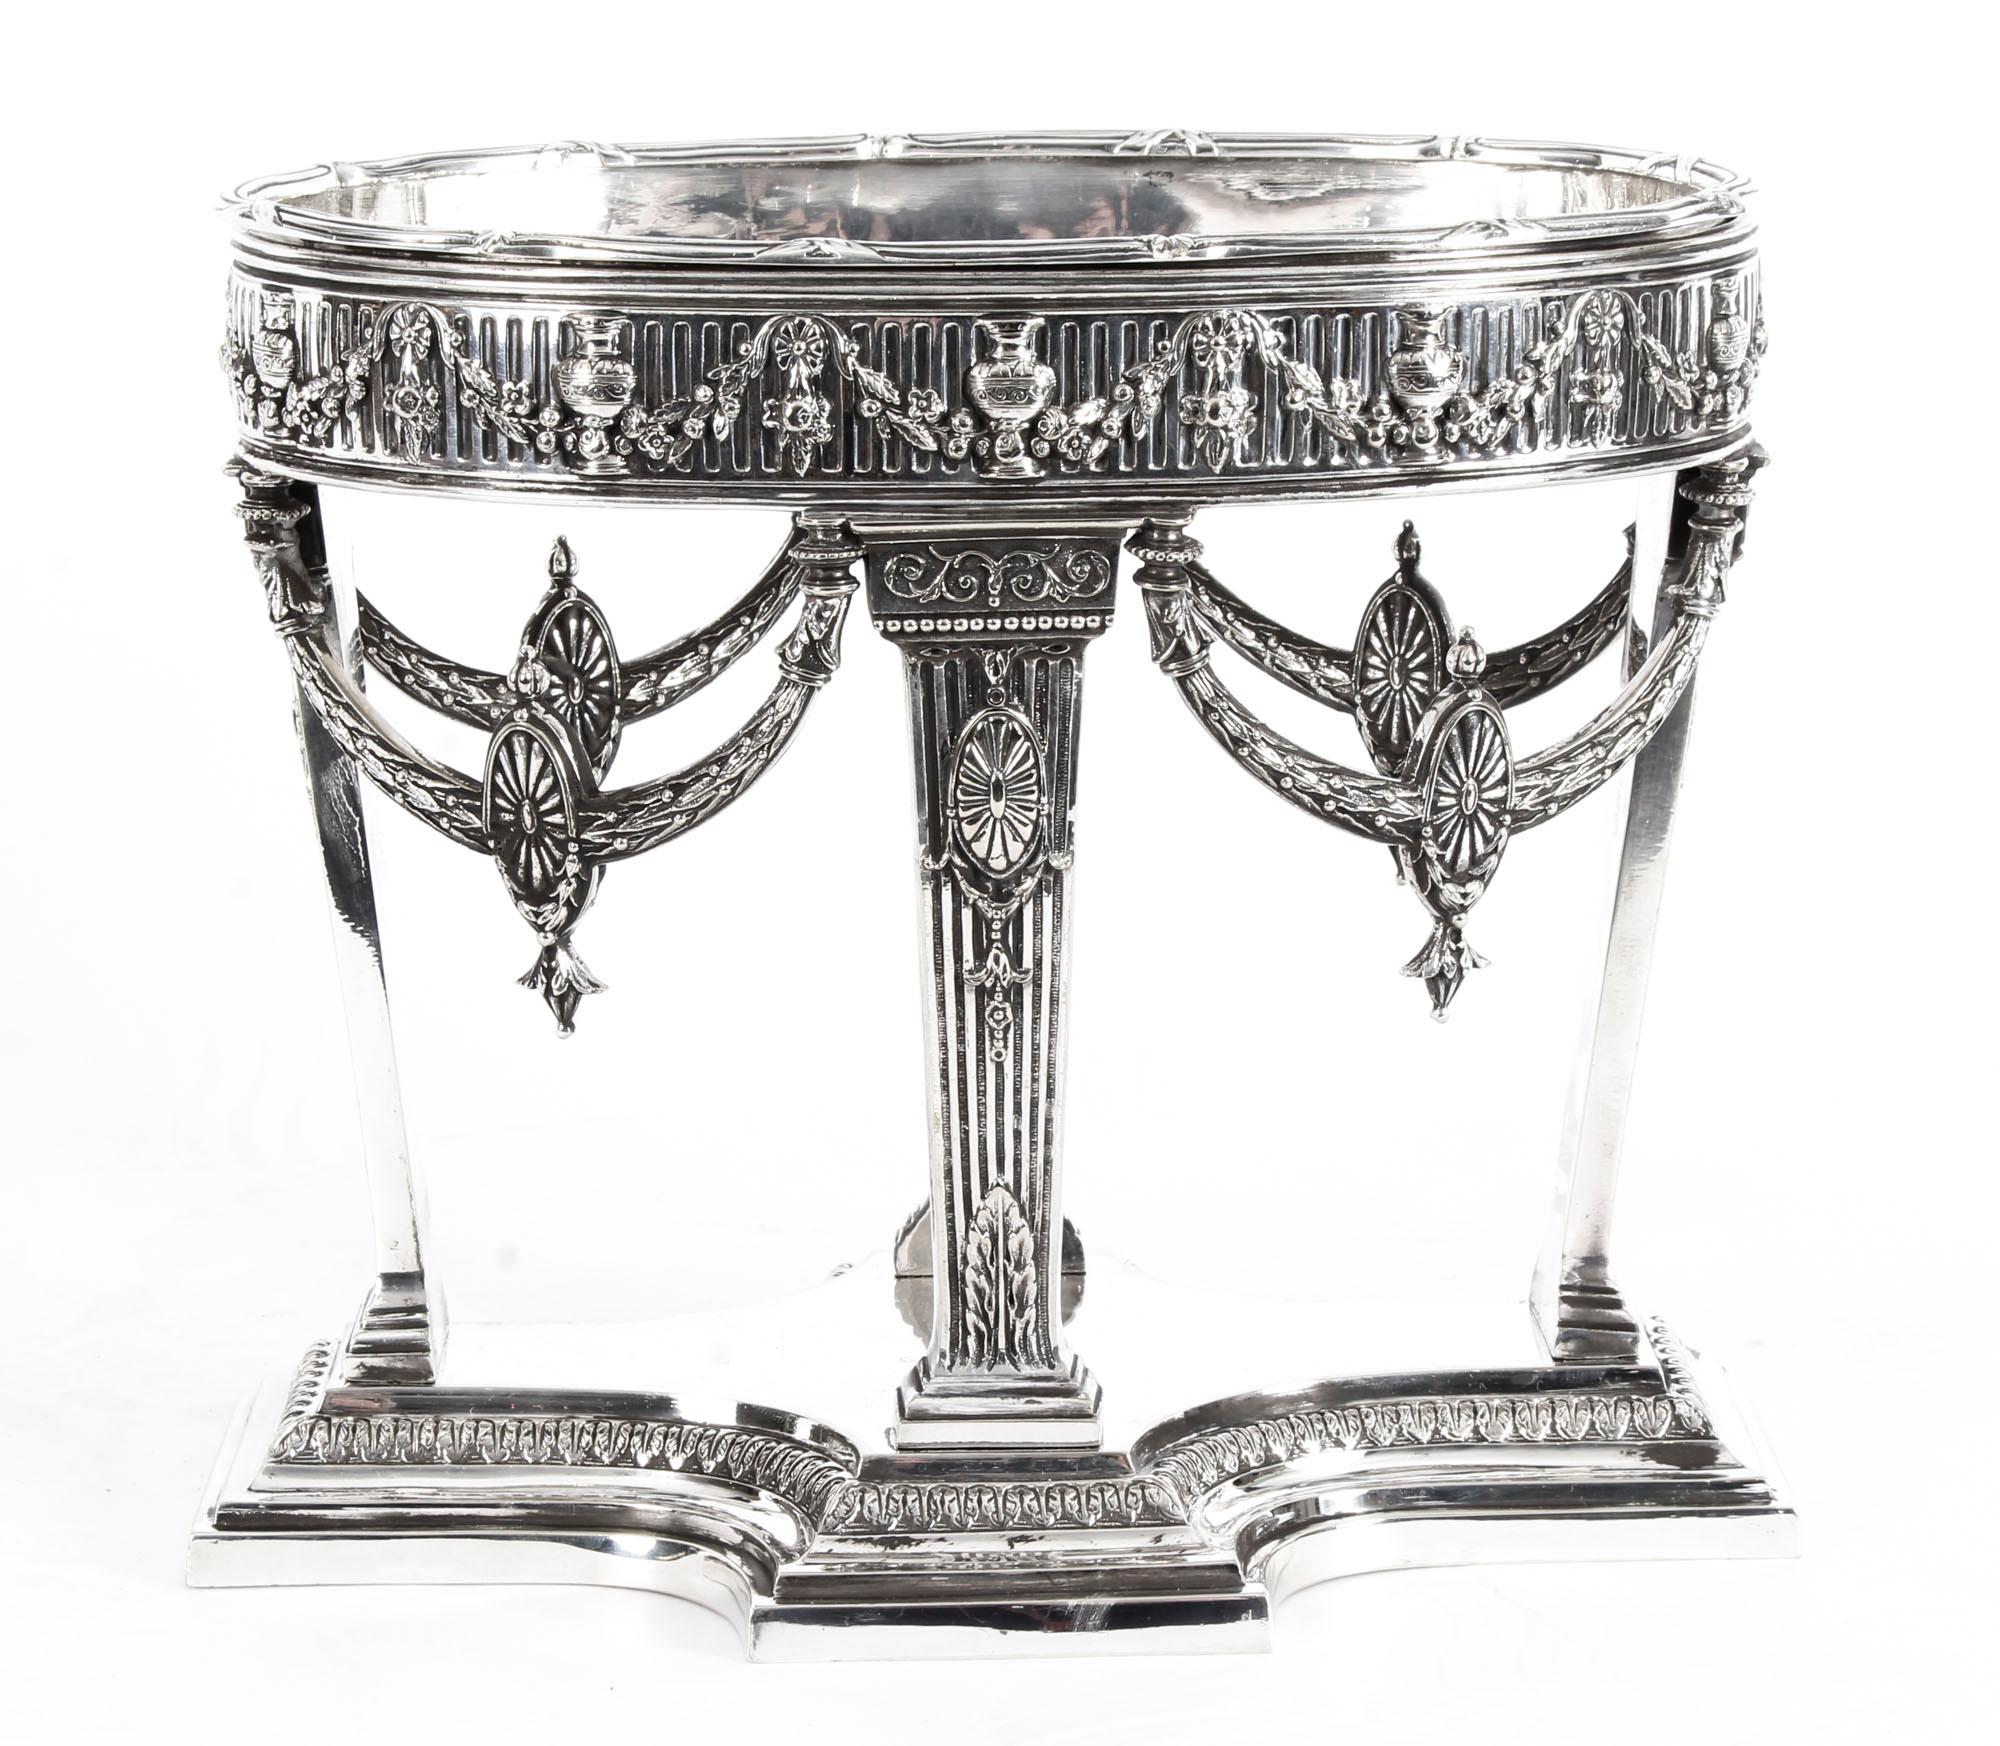 This is an intricate, extremely attractive and exquisitely made antique Victorian silver plated centrepiece by the renowned silversmith, Horace Woodward and Co., Birmingham, 1876 in date.
 
This stunning centrepiece has a central oval silver